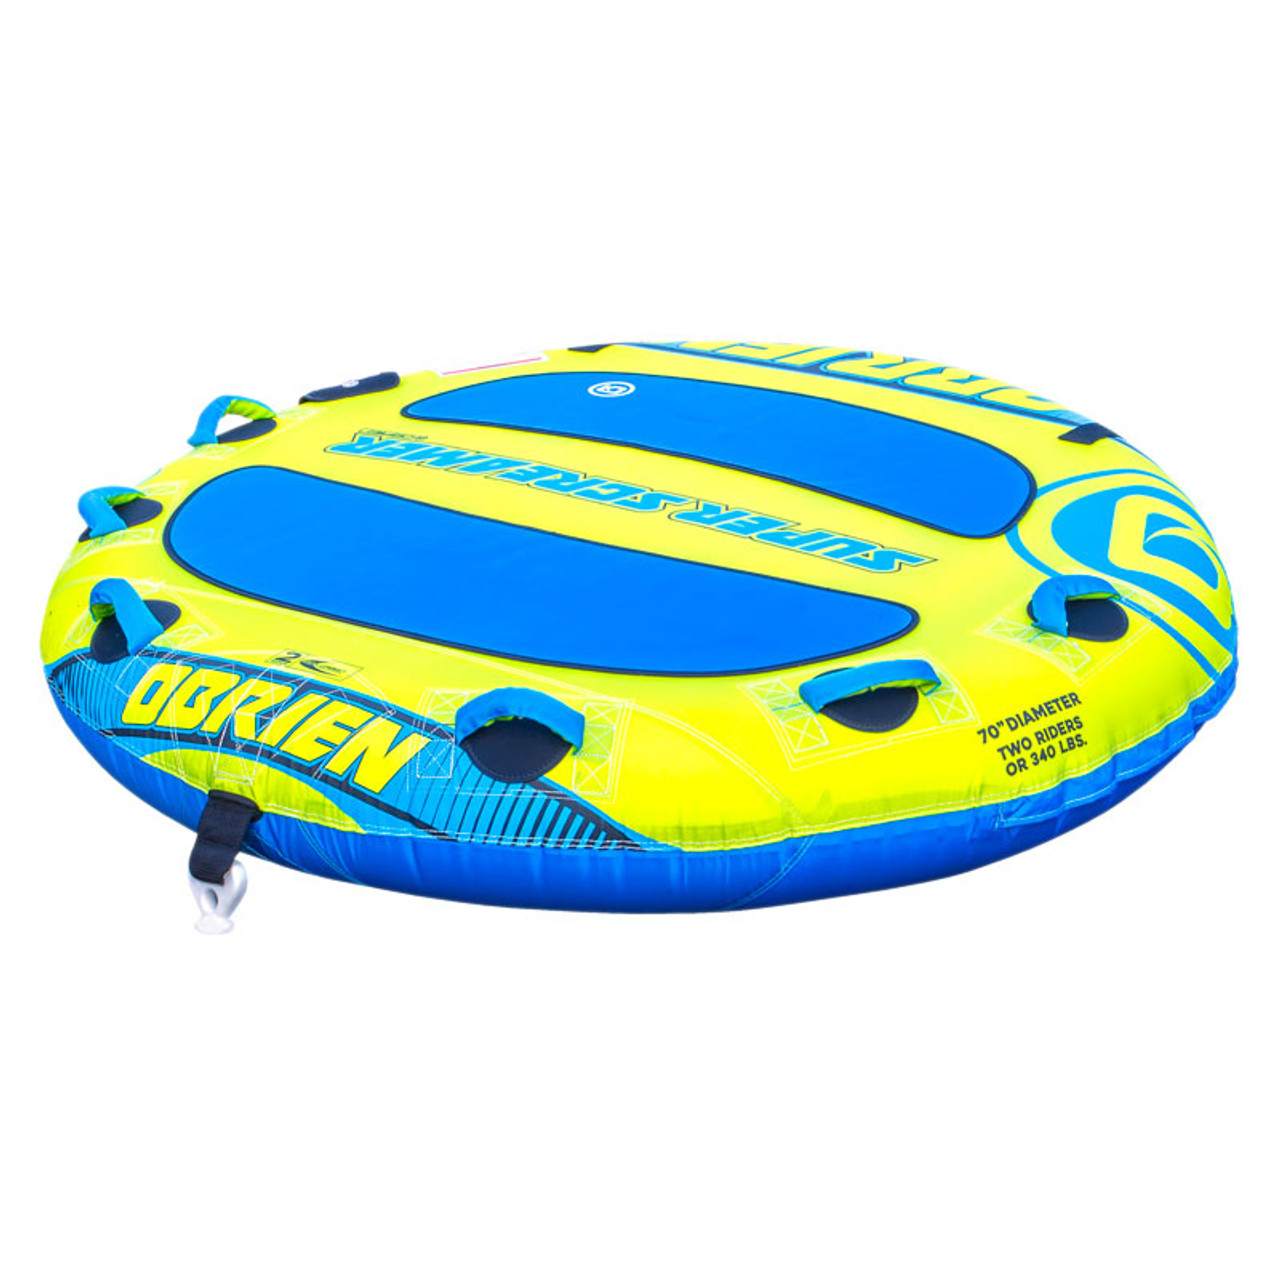 O'Brien Super Screamer 70" 2 Rider Towable Tube Boater's Outlet